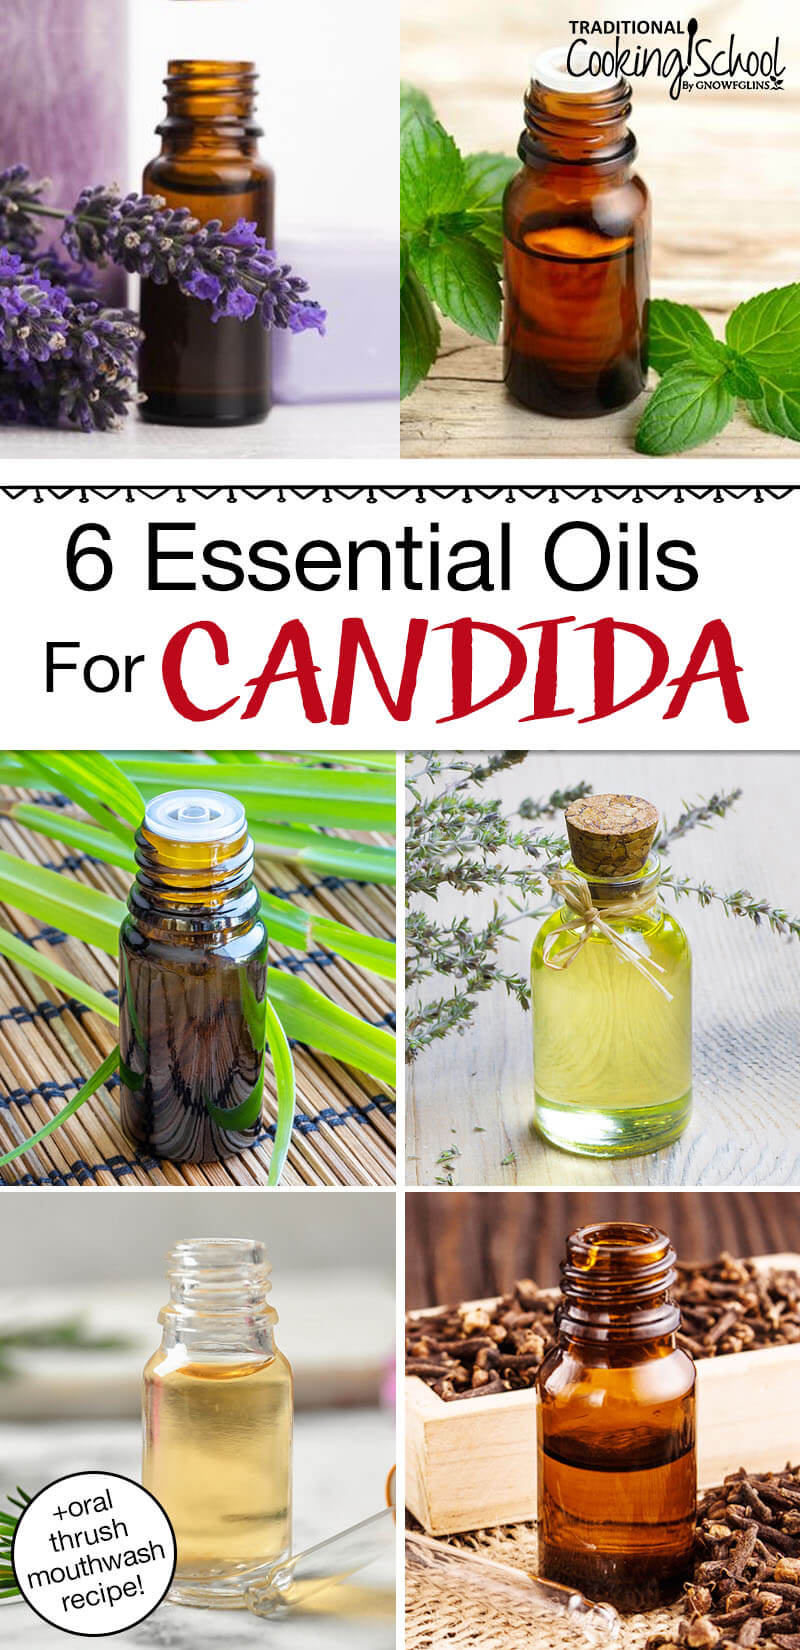 Photo collage of various small bottles of essential oils. Text overlay says: "6 Essential Oils For Candida (+oral thrush mouthwash recipe!)"